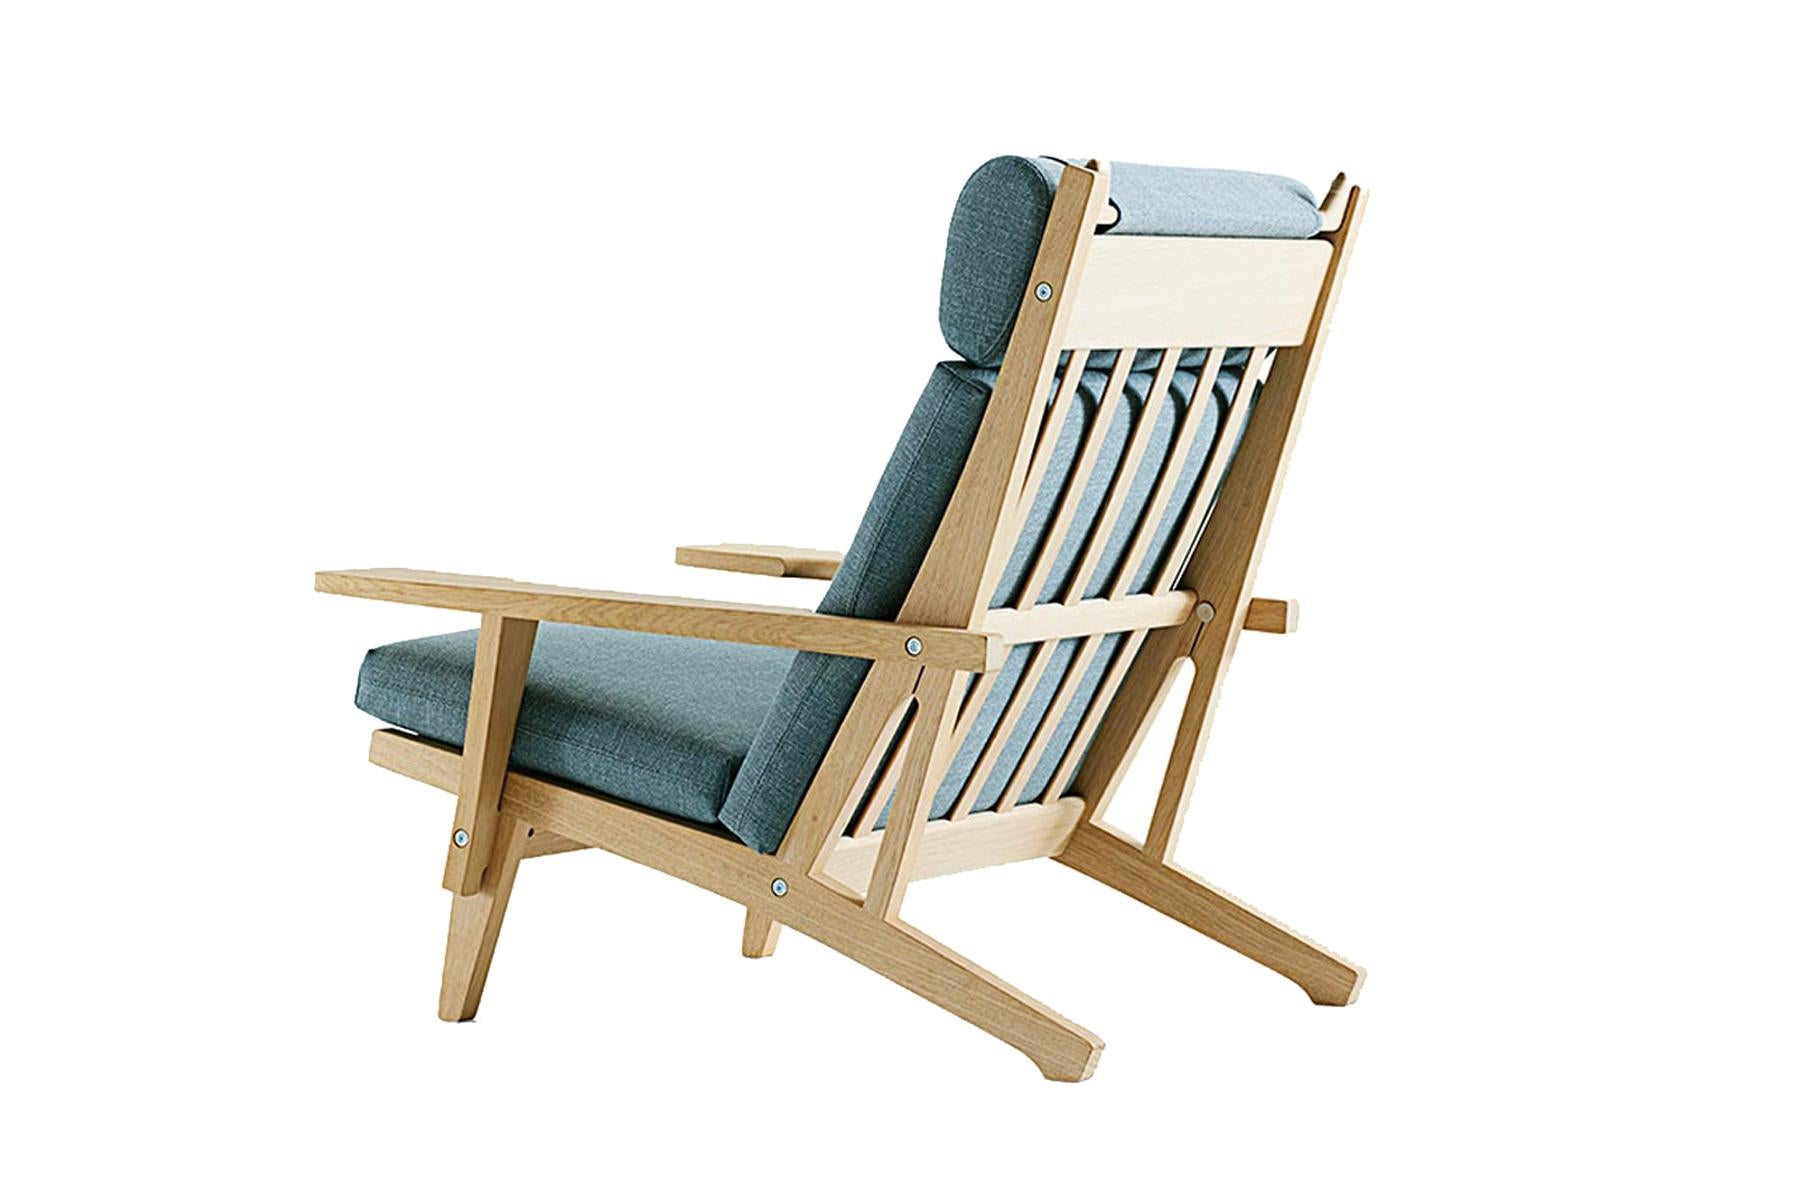 Hans Wegner GE-375 Lounge Chair w/ Arms - Stained Oak In Excellent Condition For Sale In Berkeley, CA